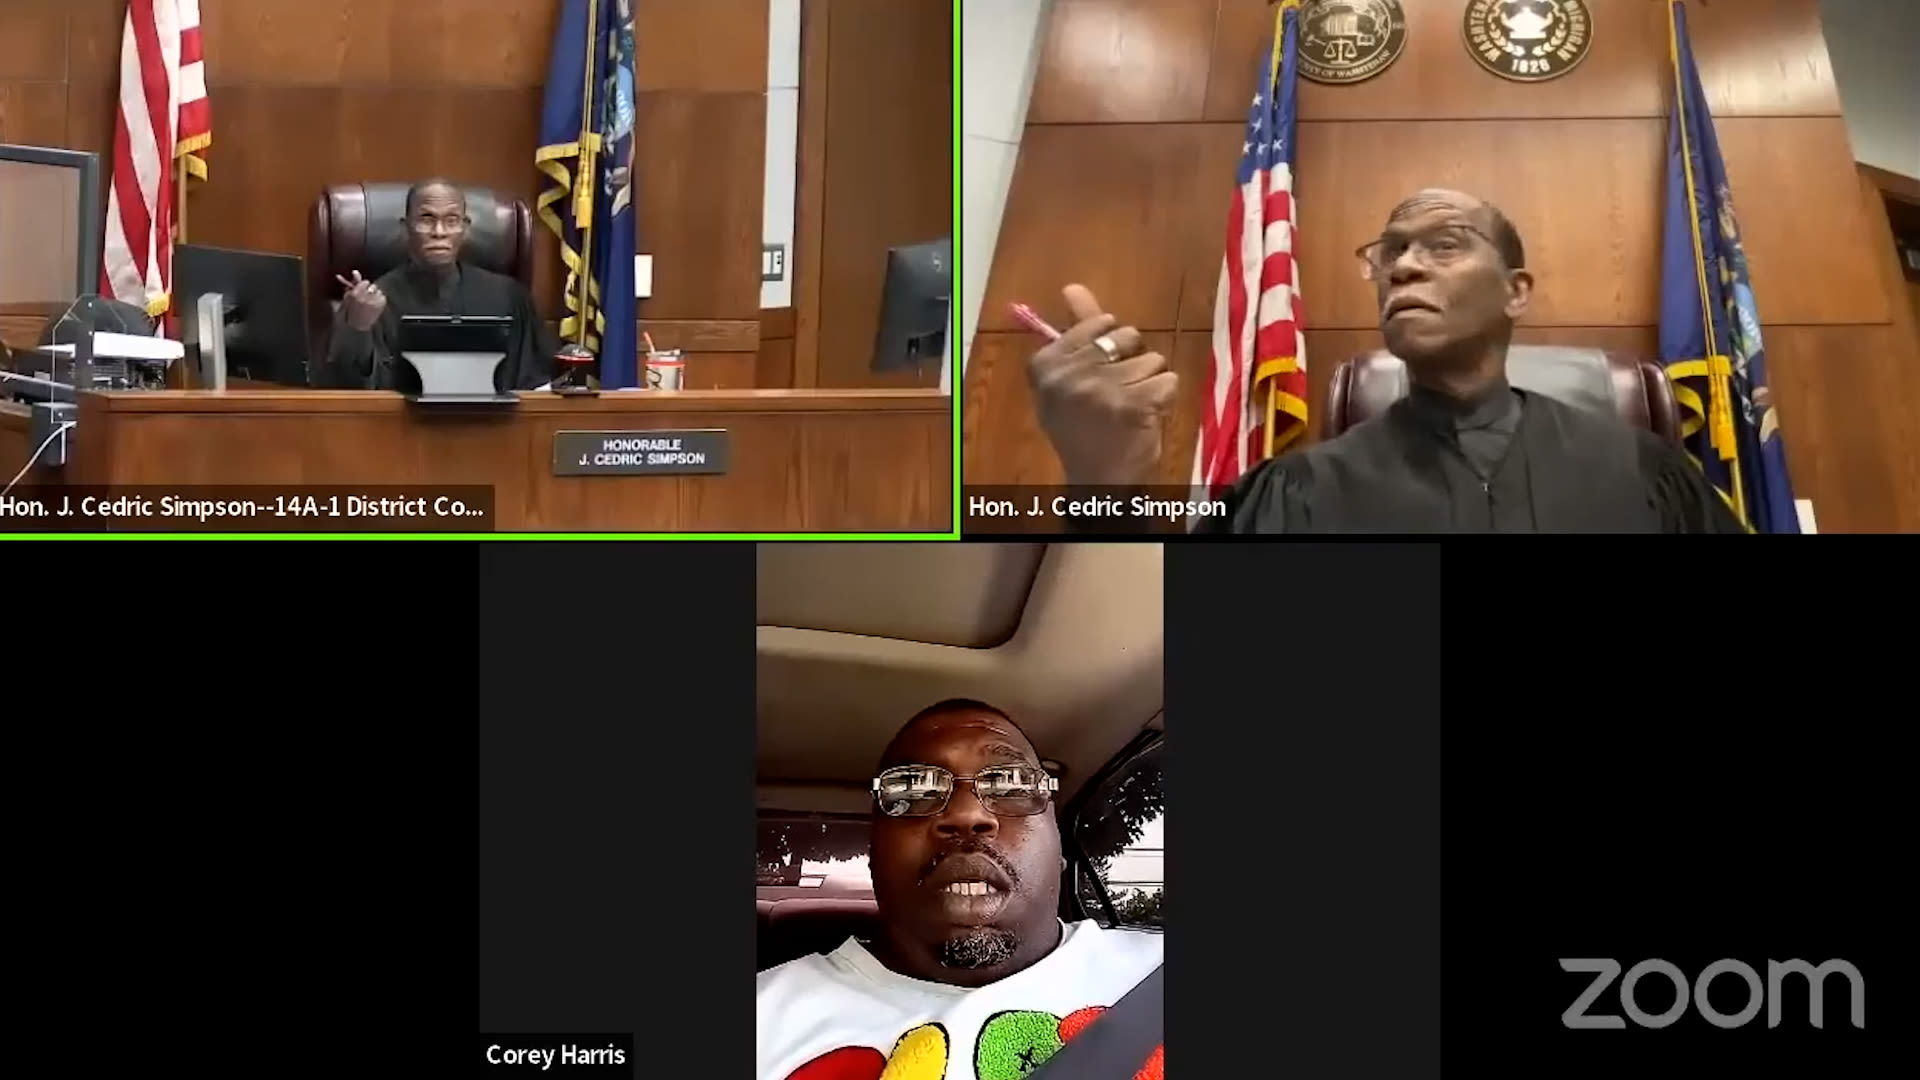 Judge stunned as man with suspended license joins Zoom hearing while driving